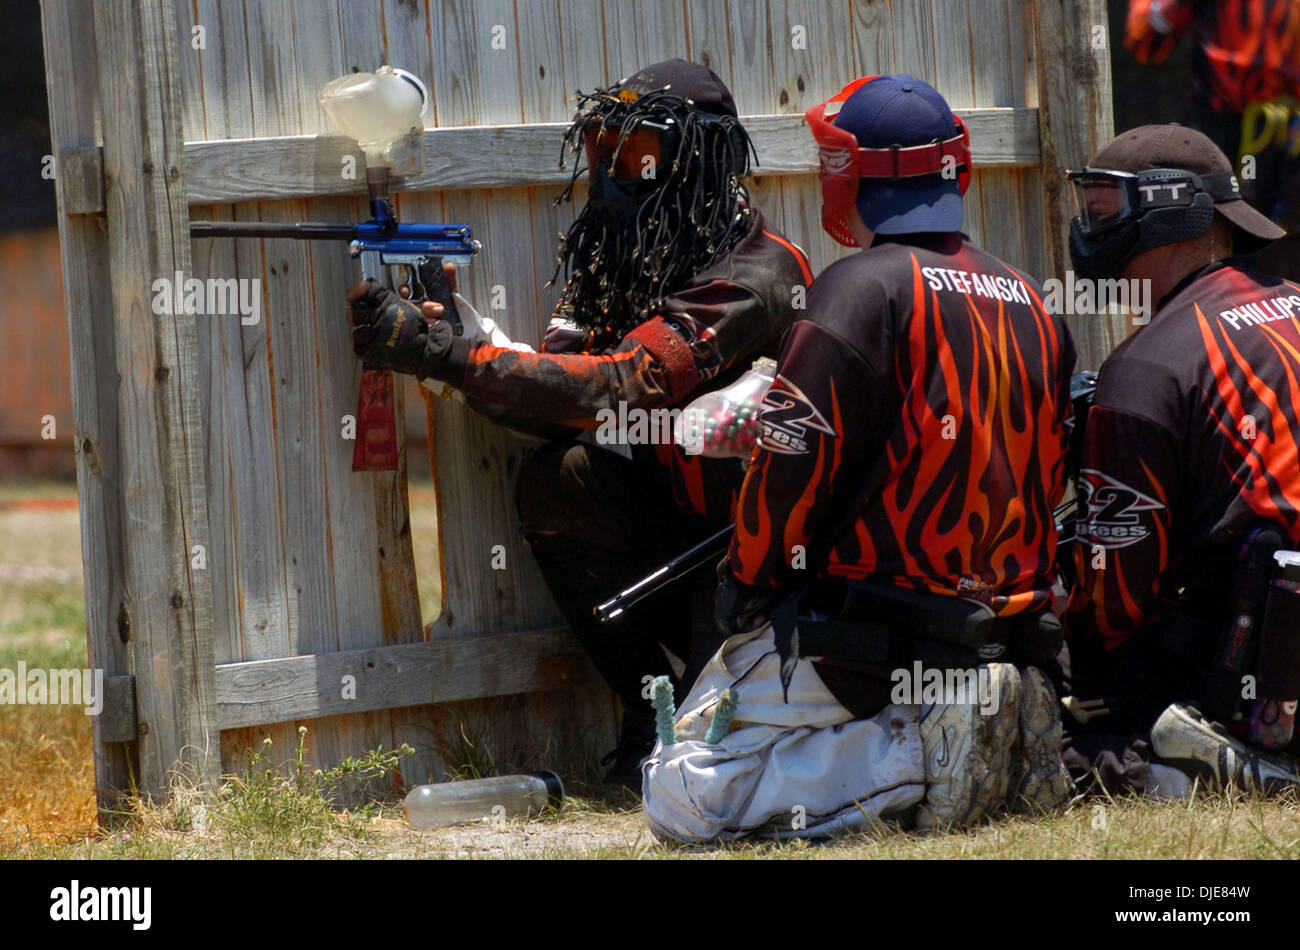 Jun 02, 2004; Palm Beach, FL, USA; Pasco County Firefighters JIMMY RODRIGUEZ (L) fires his is paintball air gun against Palm Beach Fire & Rescue during competition for the gold medal during the Florida State Fire Fighters games Wednesday June 2, 2004. Stock Photo